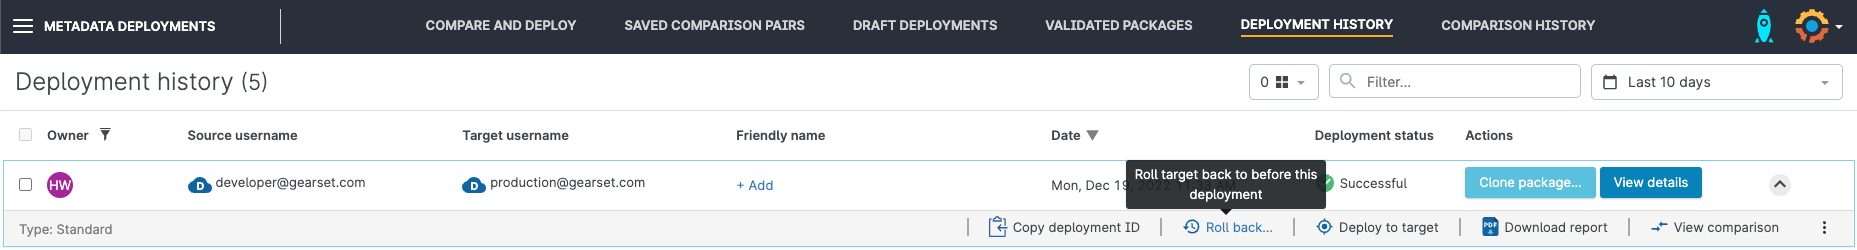 Screenshot of Gearset's deployment history page